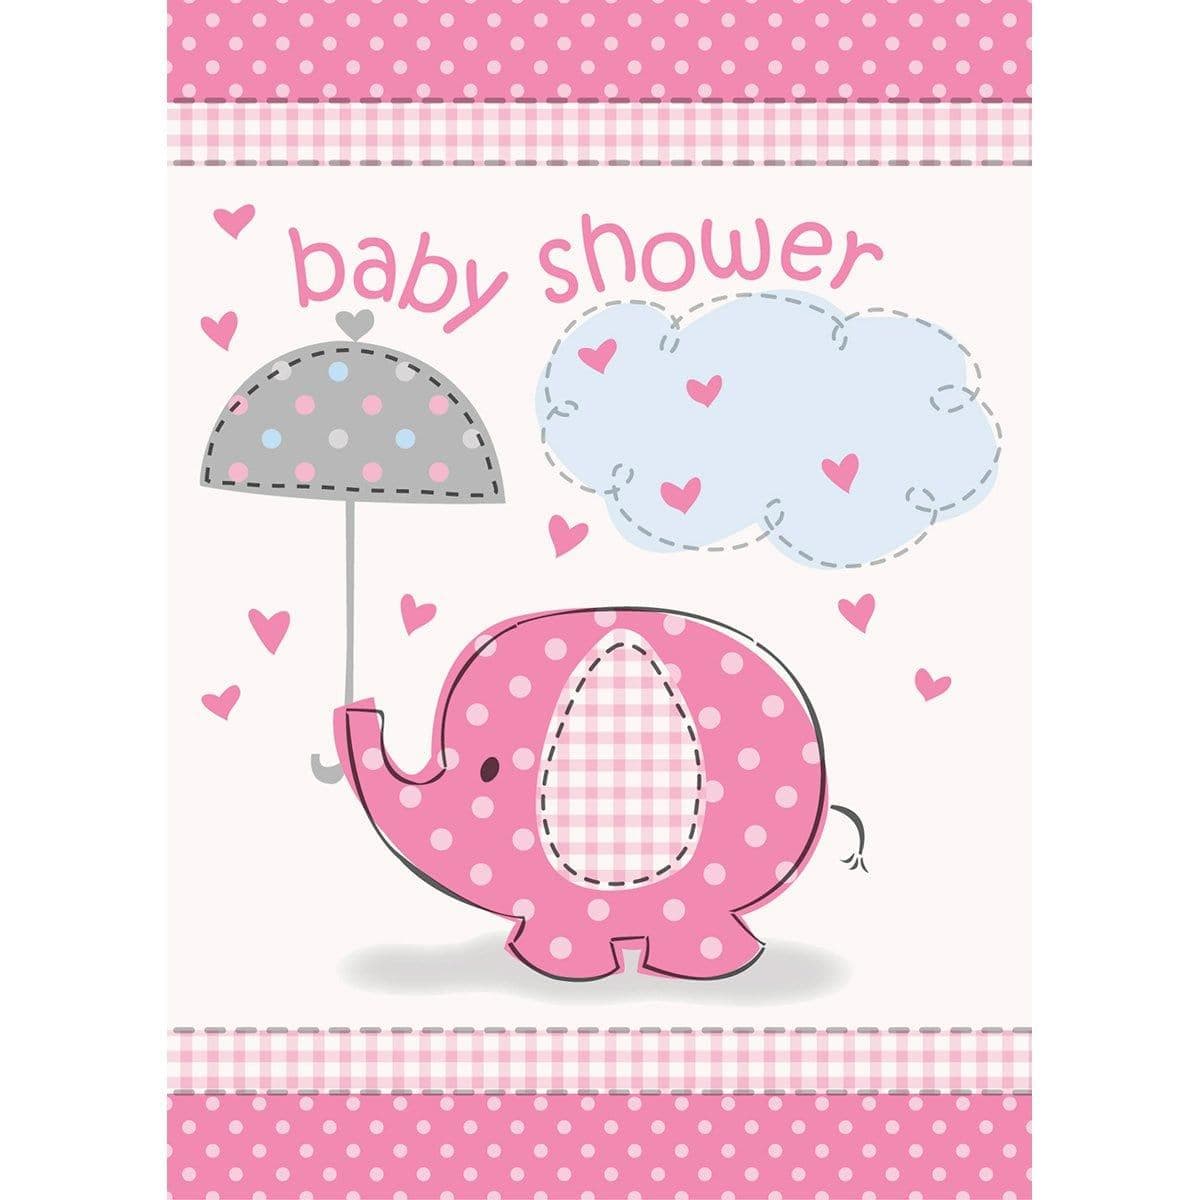 Buy Baby Shower Umbrellaphants Pink invitations, 8 per package sold at Party Expert